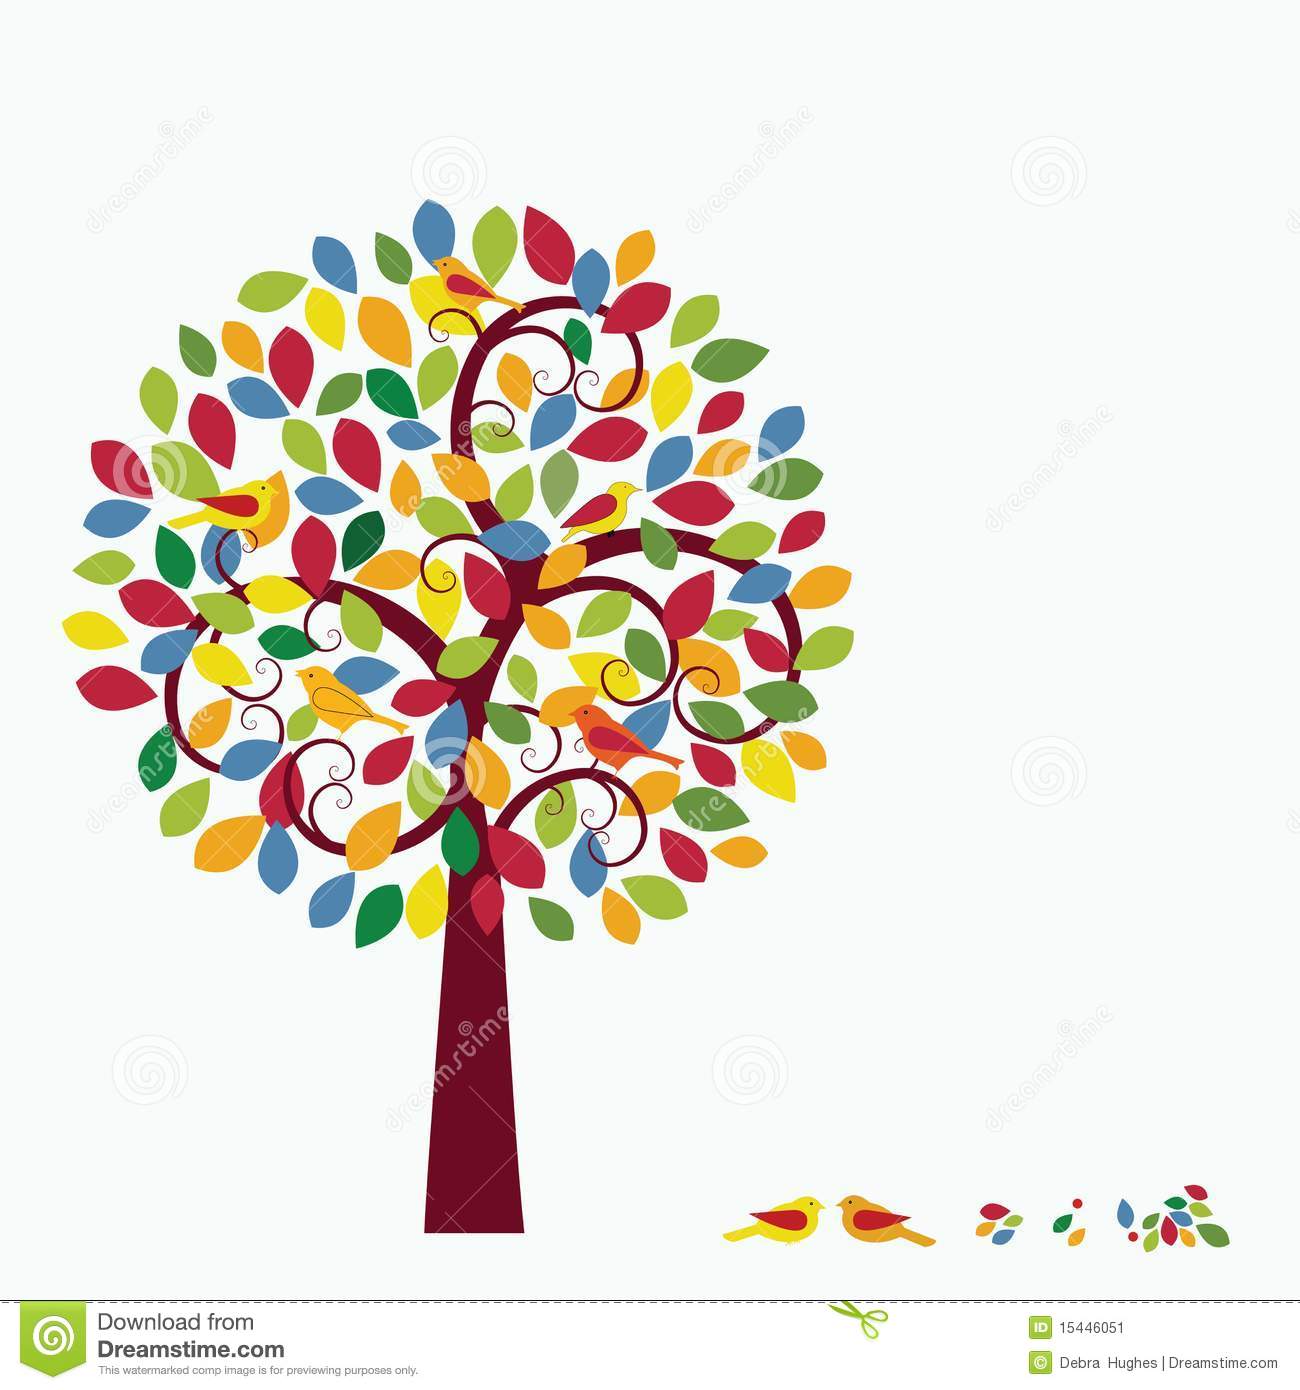 Multicolored Whimsical Tree With Coil Branches And Birds Nesting In